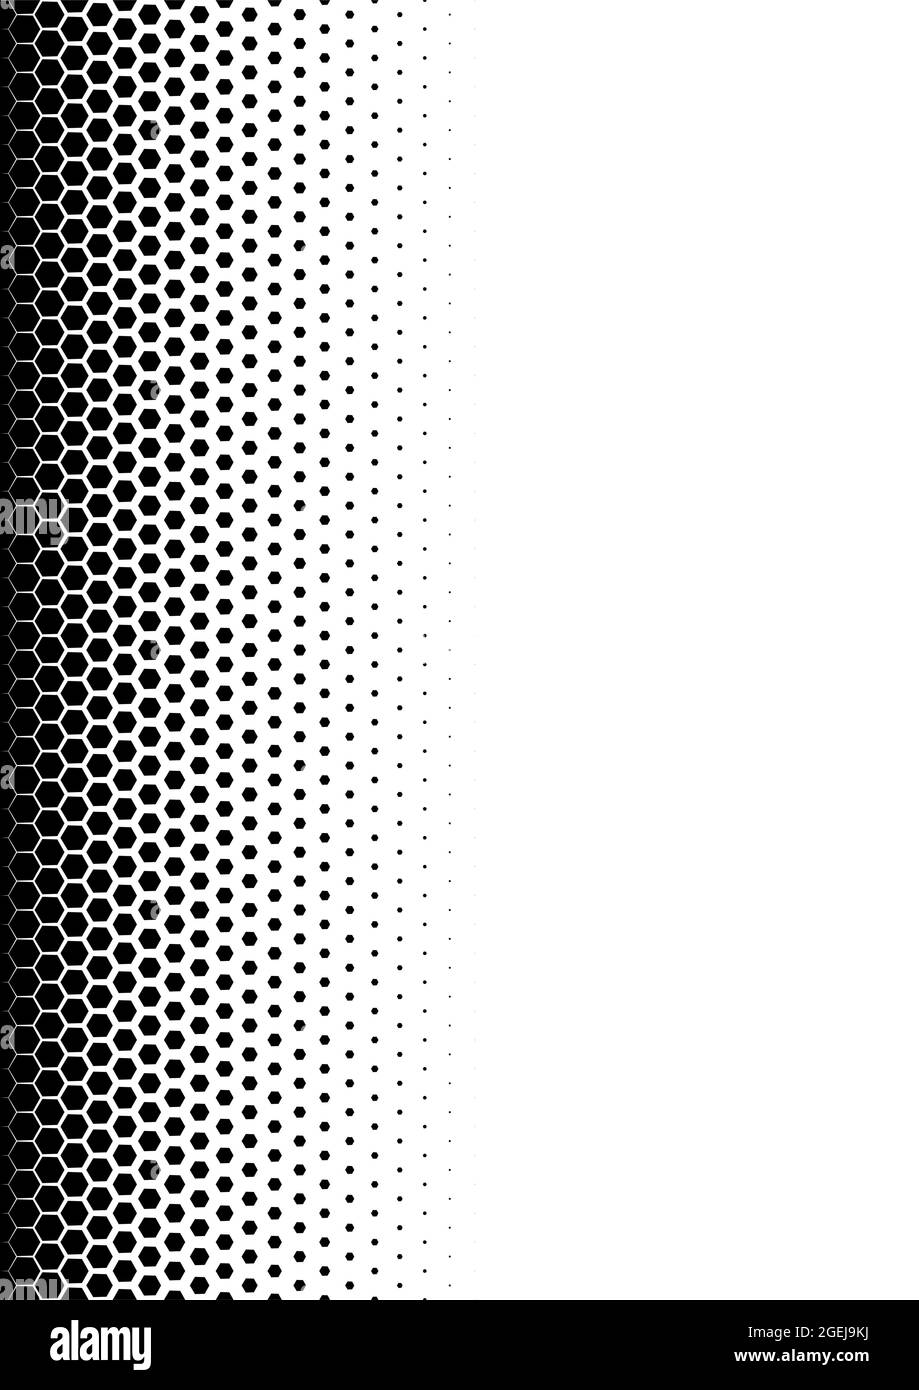 Seamless Halftone Vector Background Filled With Black Hexagones Middle Fade Out Figures In